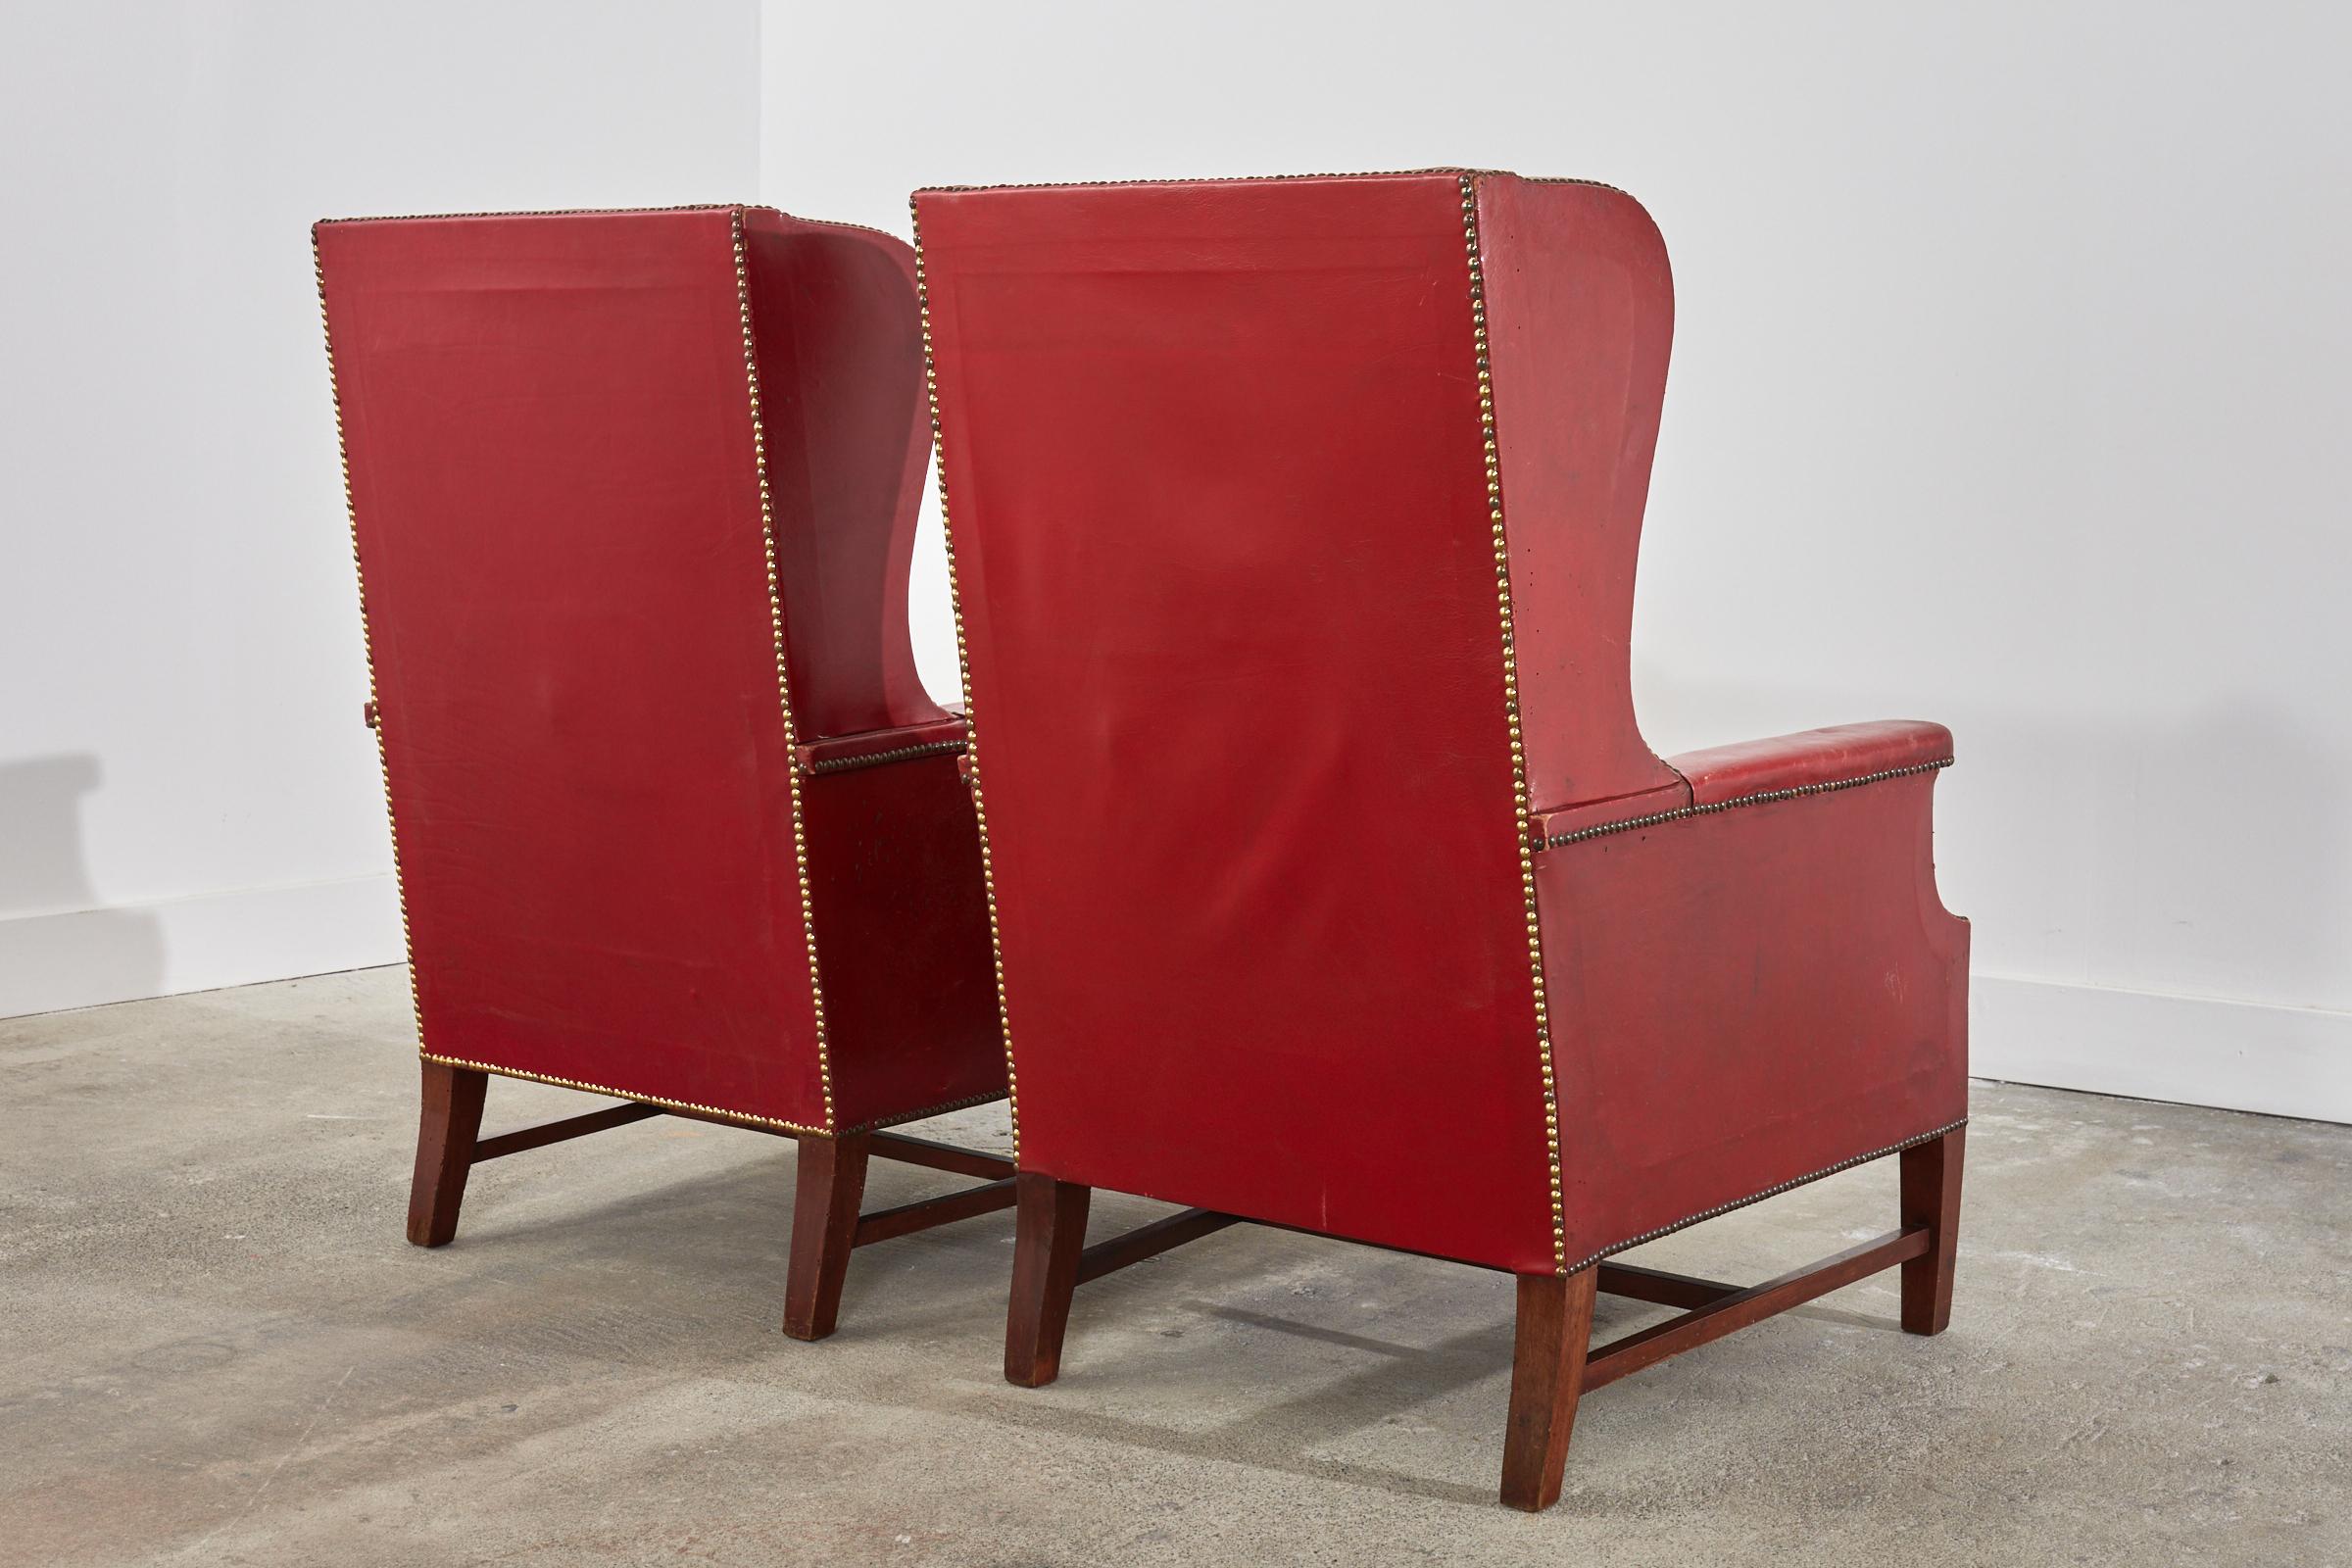 Pair of French Art Deco Cherry Red Leather Wingback Chairs For Sale 2